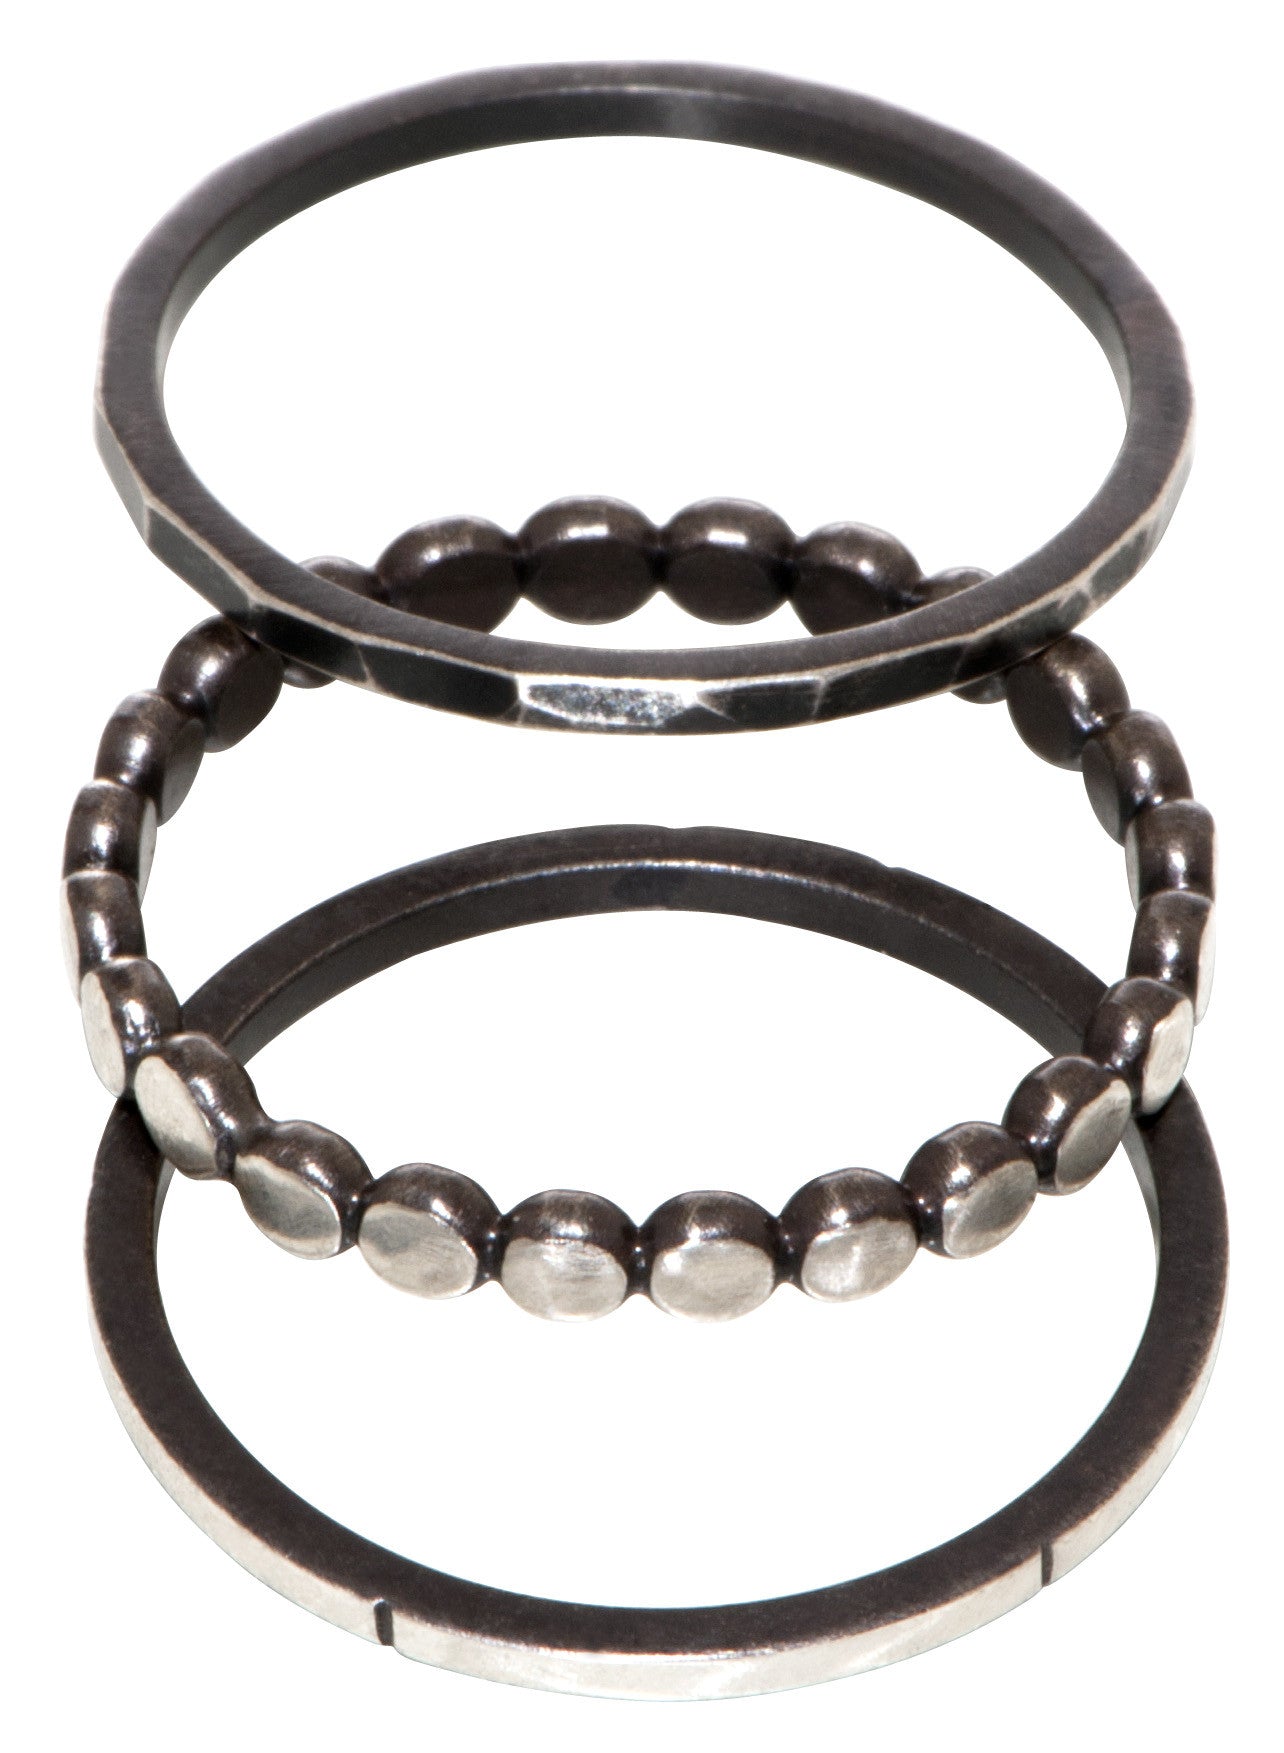 stackable ring - straight band with notches